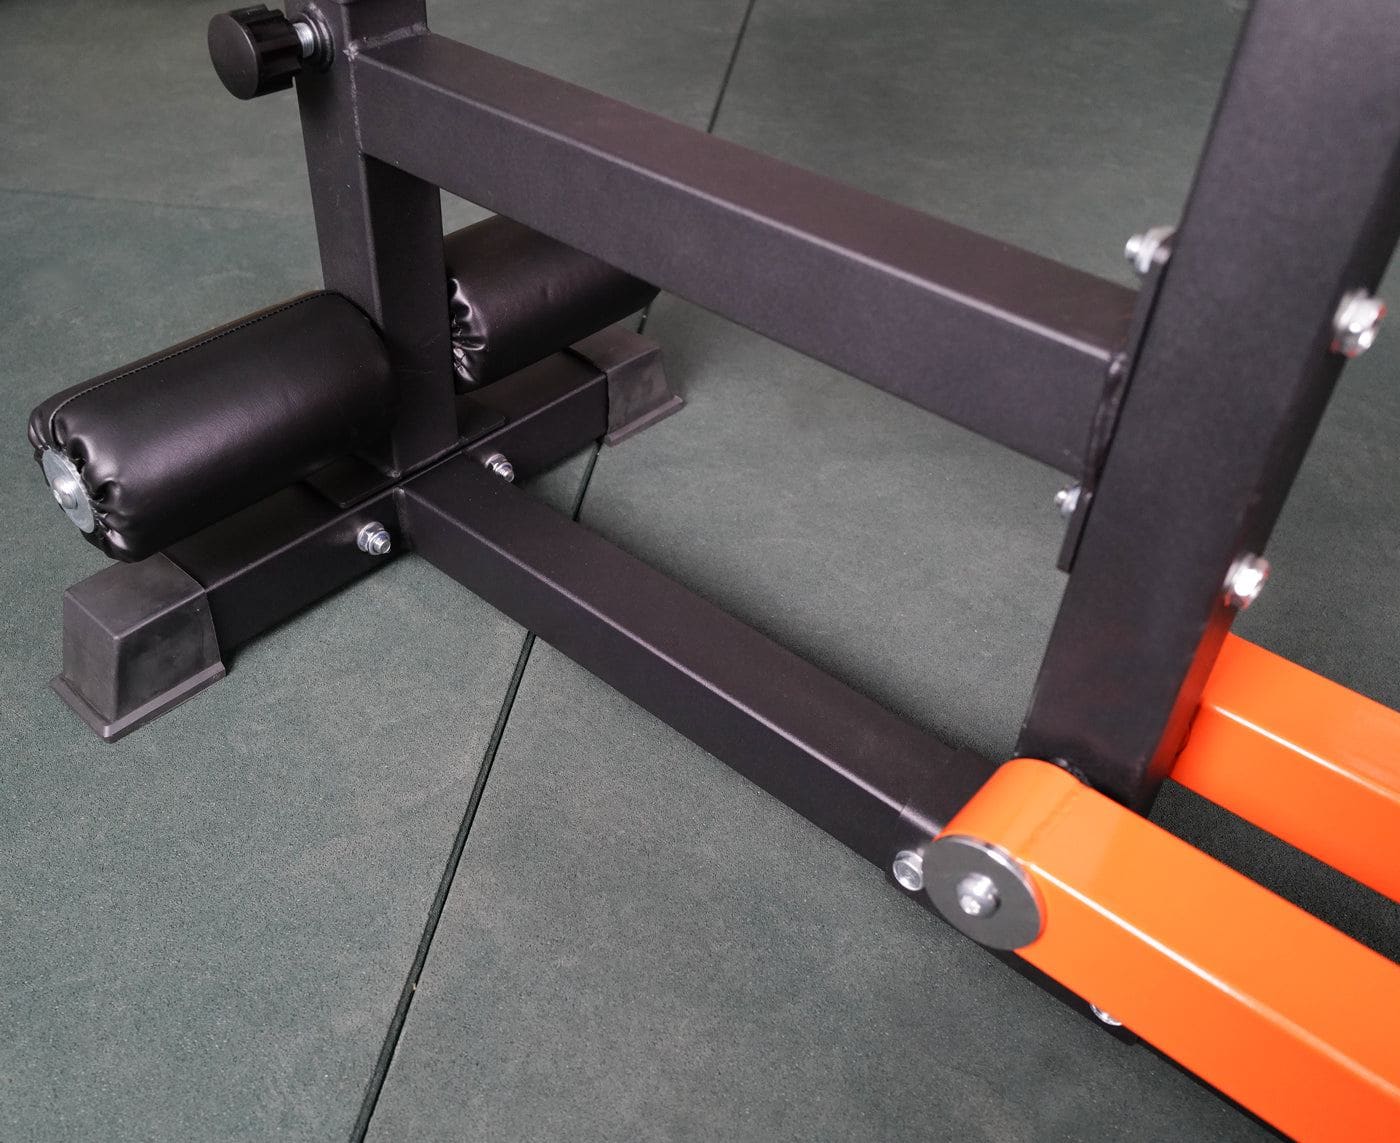 ATTIVO Seated Row/Chest Pull Machine with Independent Arms